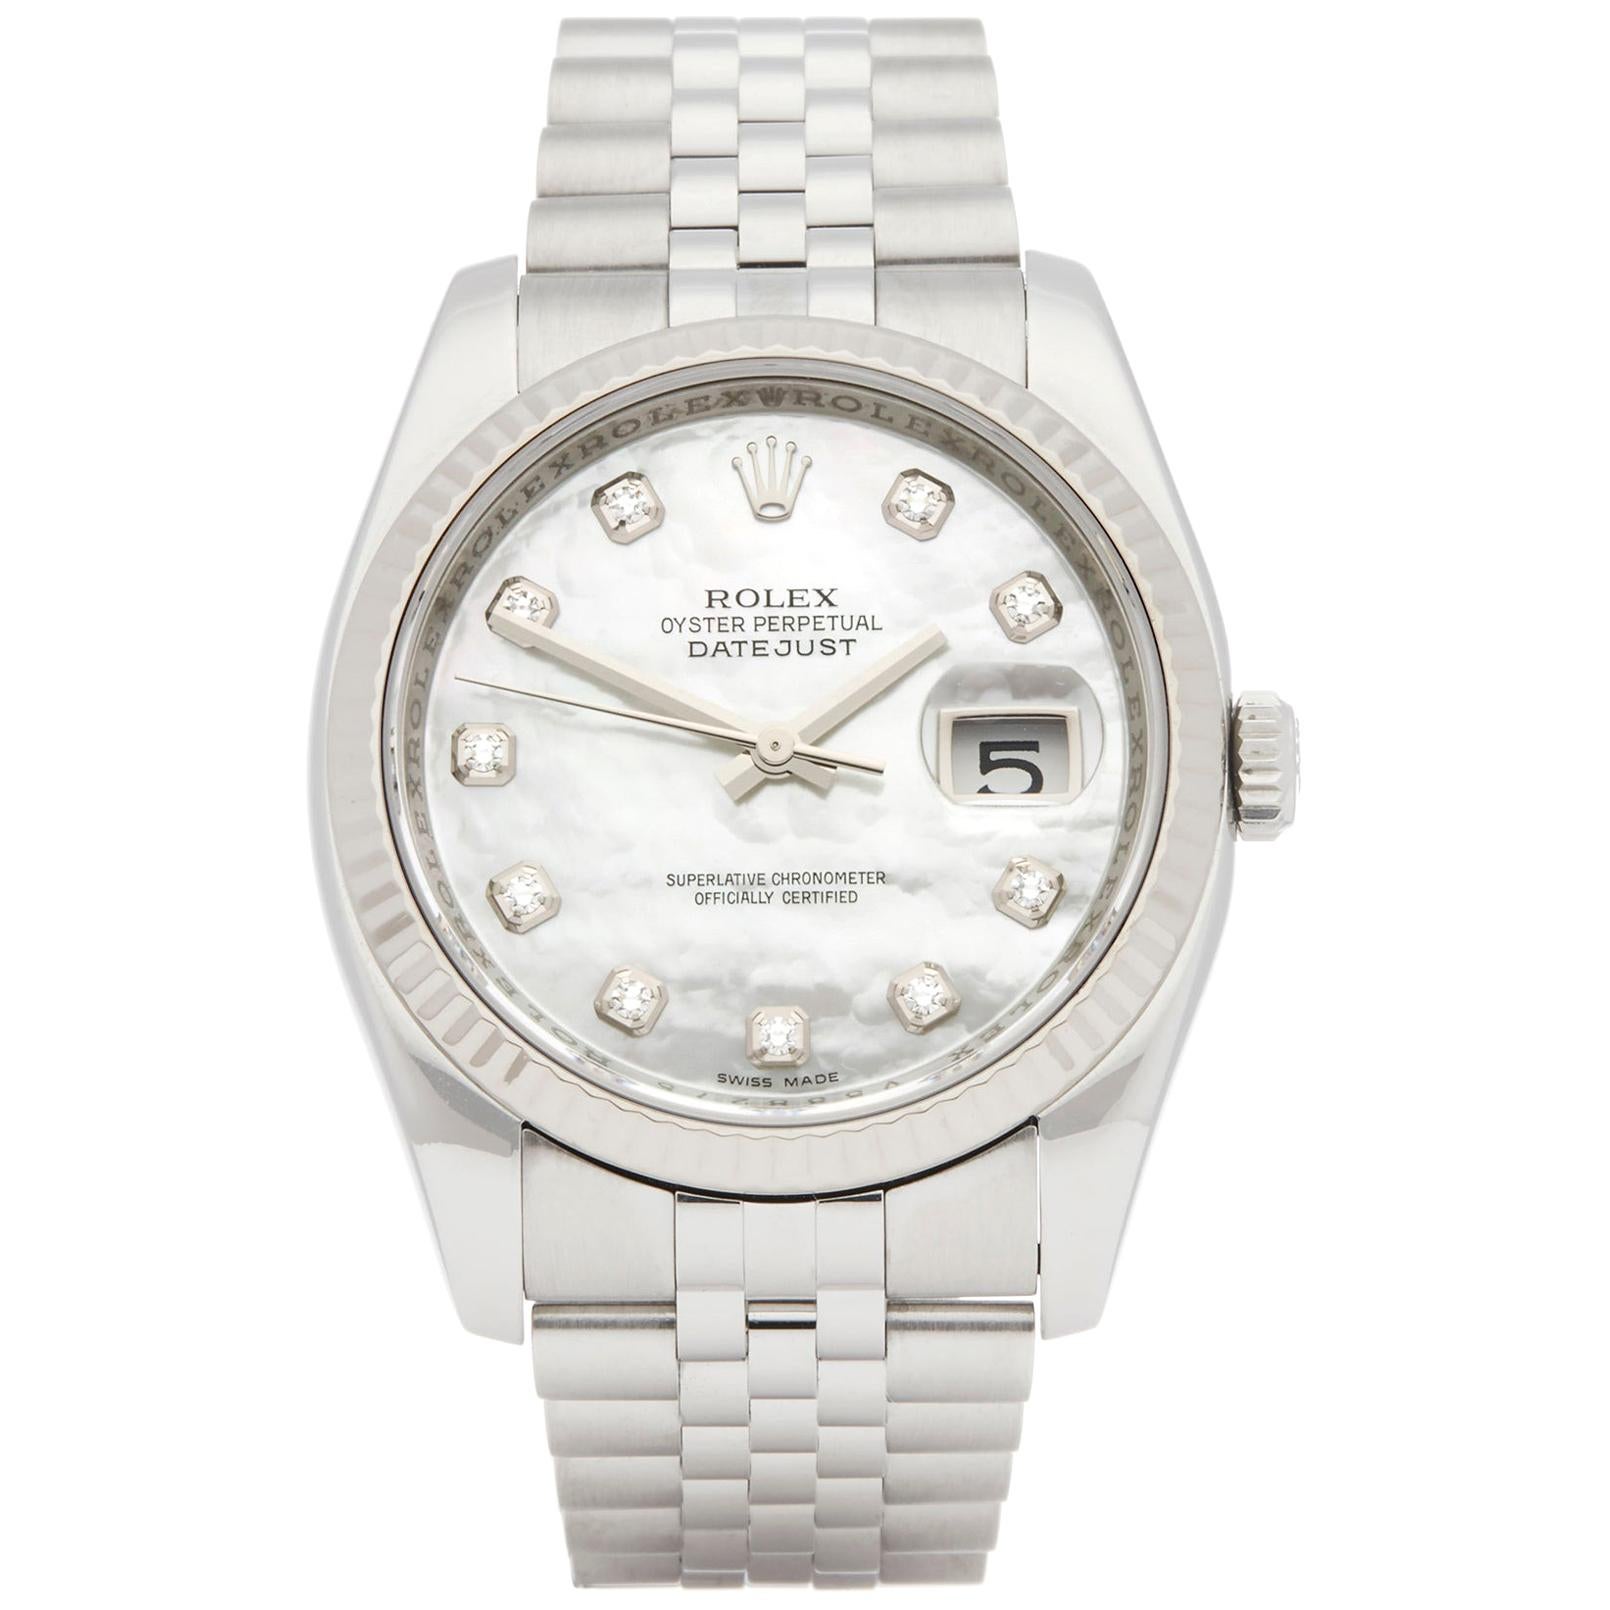 Rolex Datejust 36 Diamond Mother of Pearl Stainless Steel and White Gold 116234